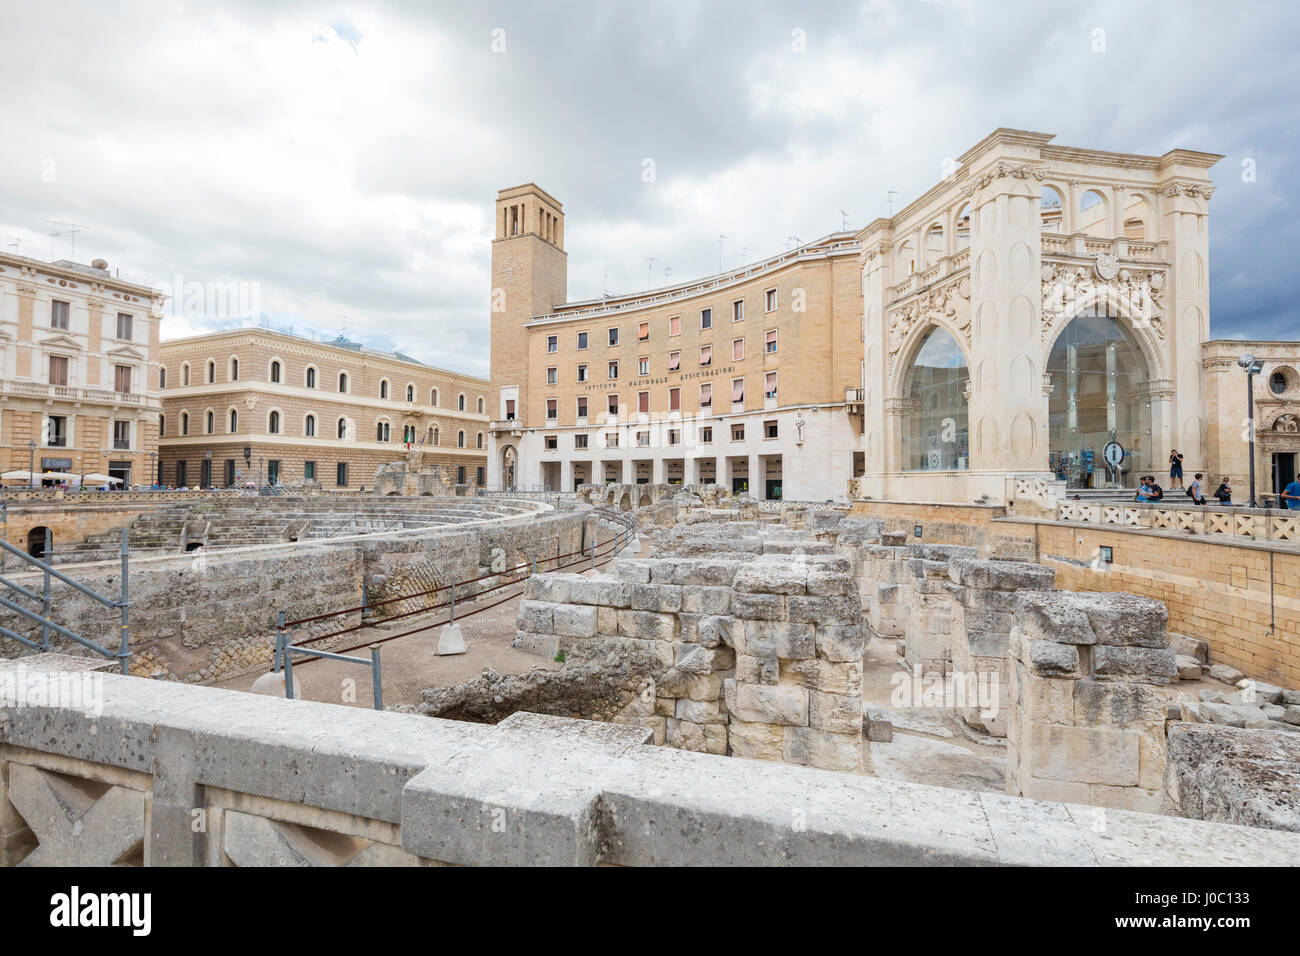 Ancient Roman ruins and historical buildings in the old town, Lecce, Apulia, Italy Stock Photo